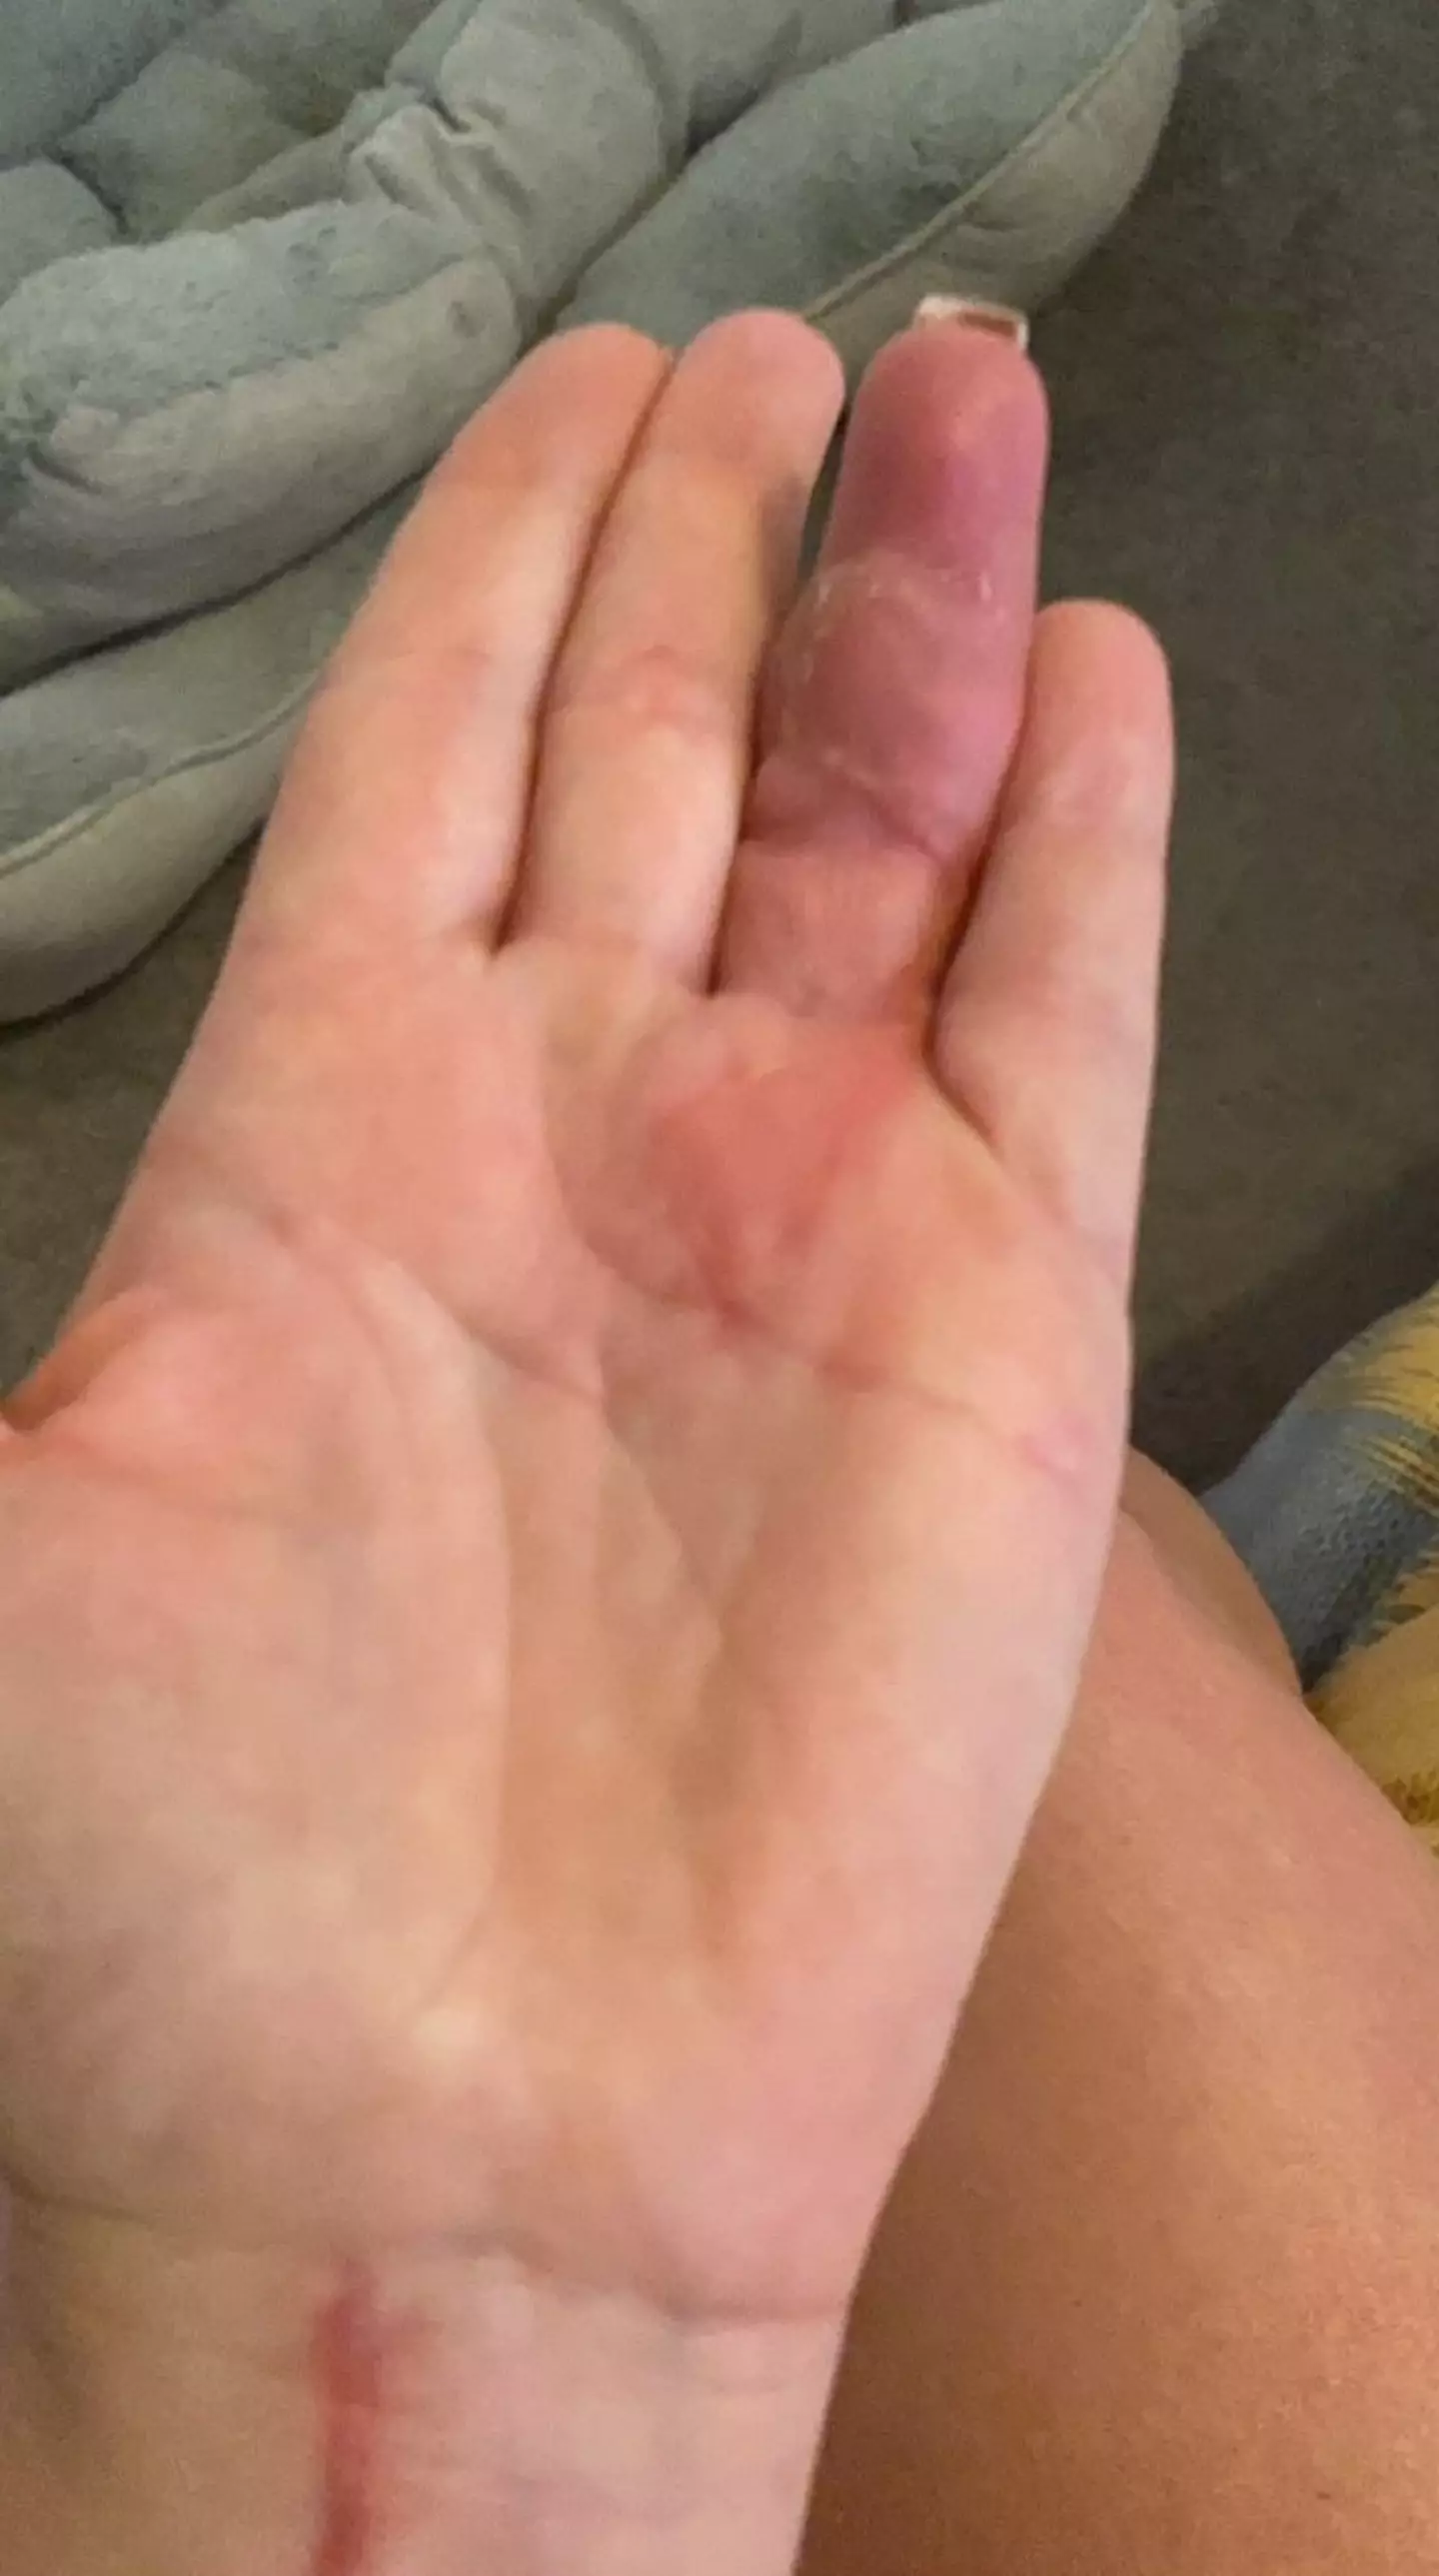 The finger was left badly swollen.